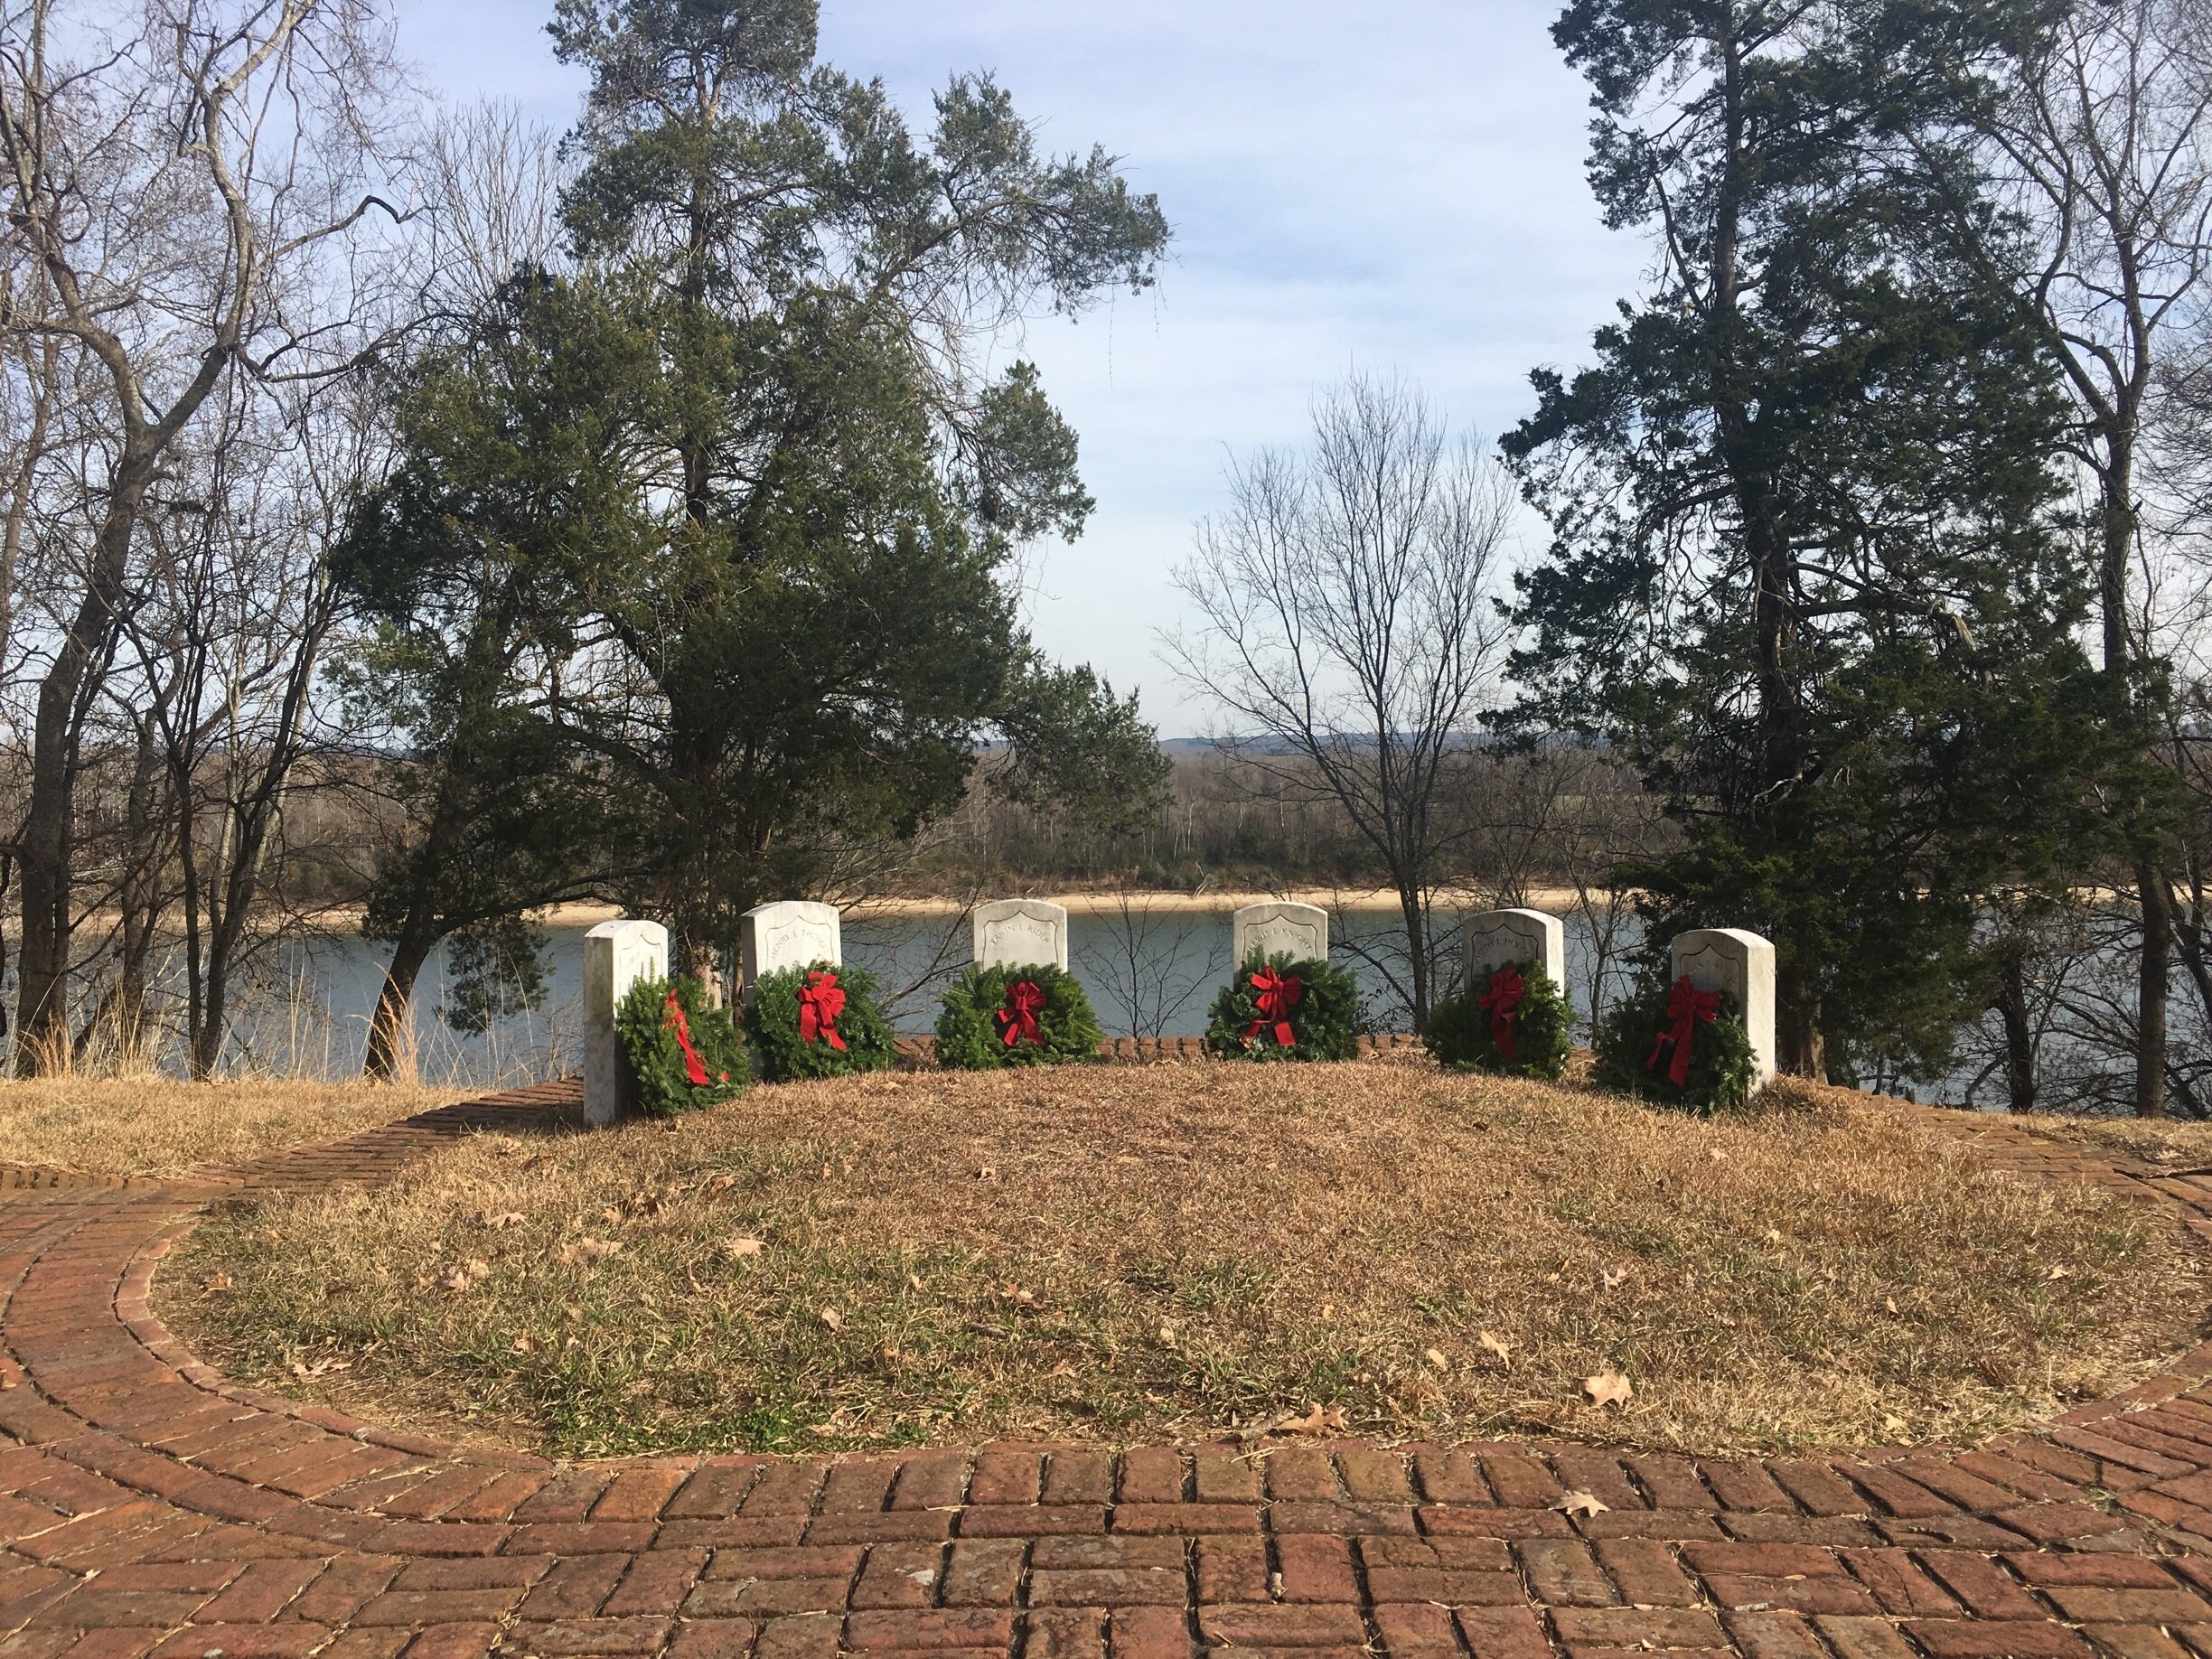 Wreaths on the graves at Shiloh! 